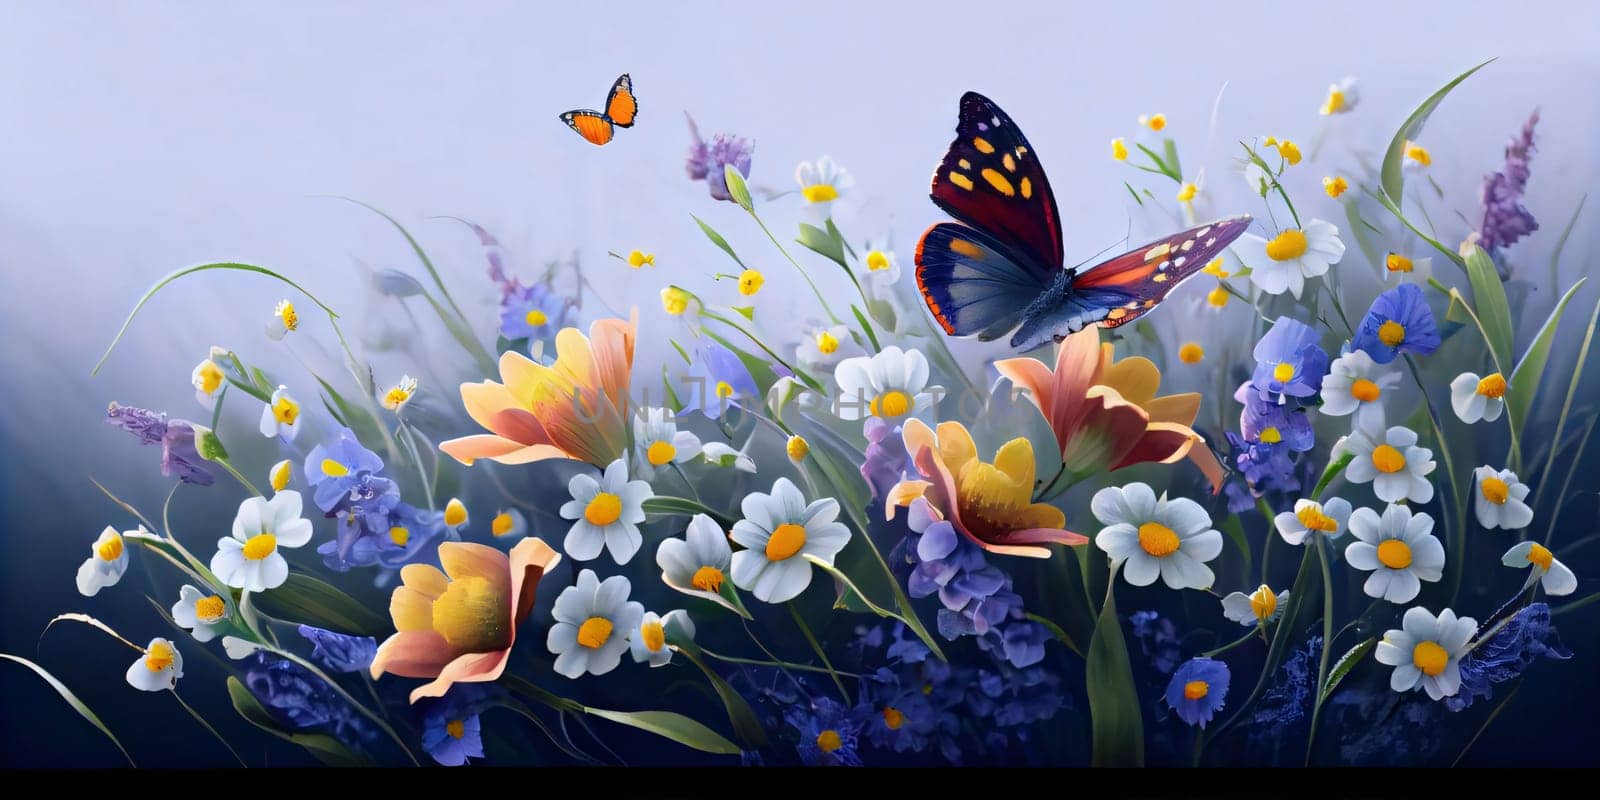 Beautiful spring illustration: Spring background with daisies, forget-me-nots and butterfly